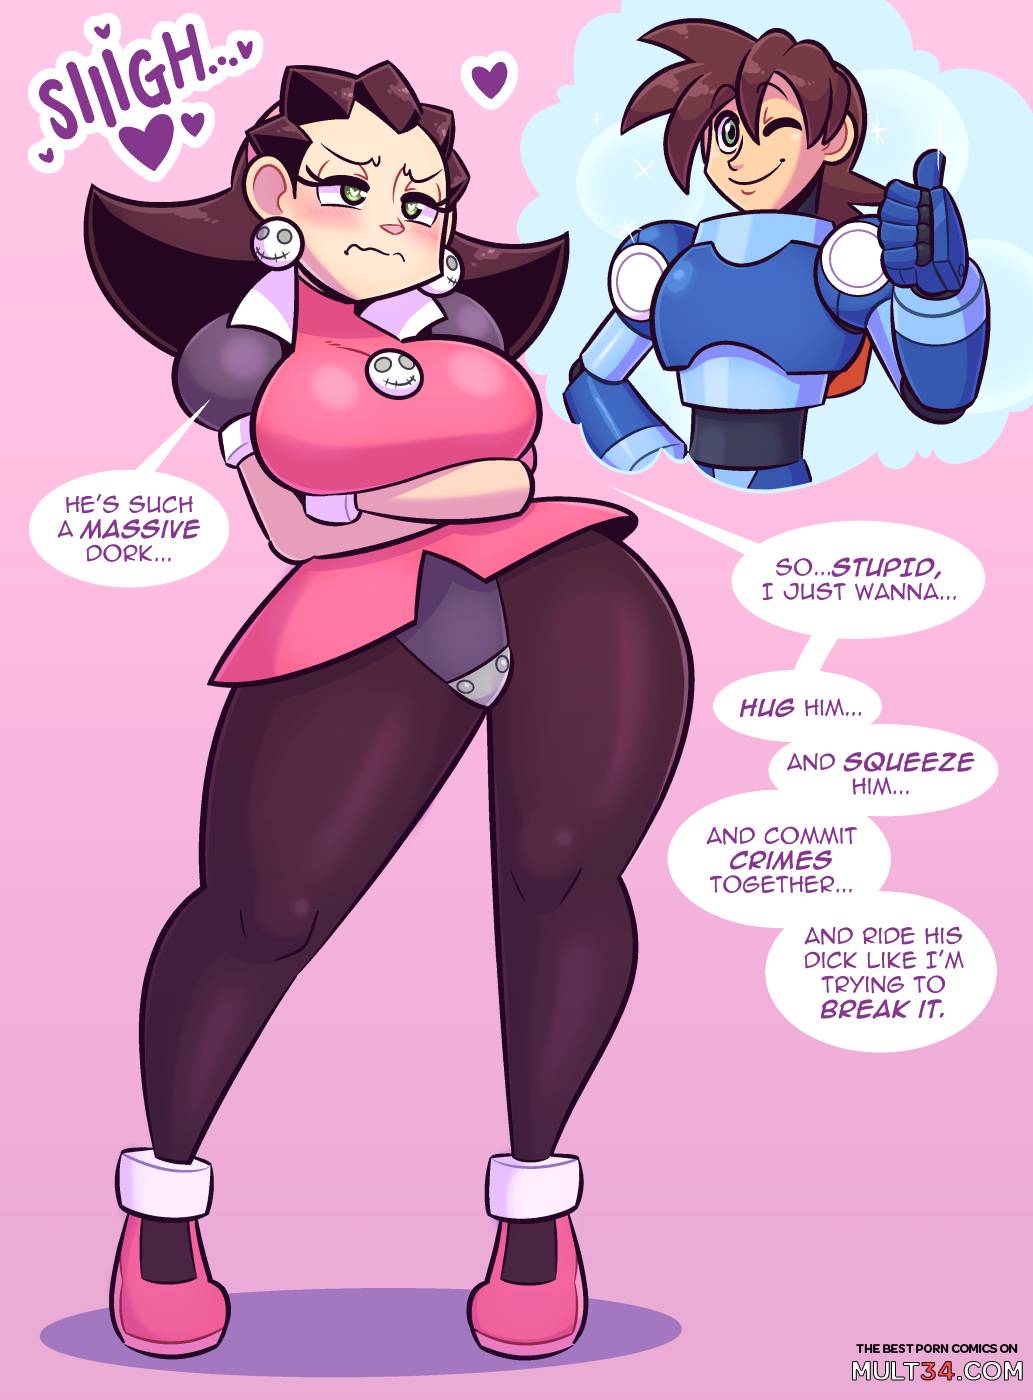 MegaMan and Tron Bonne (Fixed and Updated) page 1